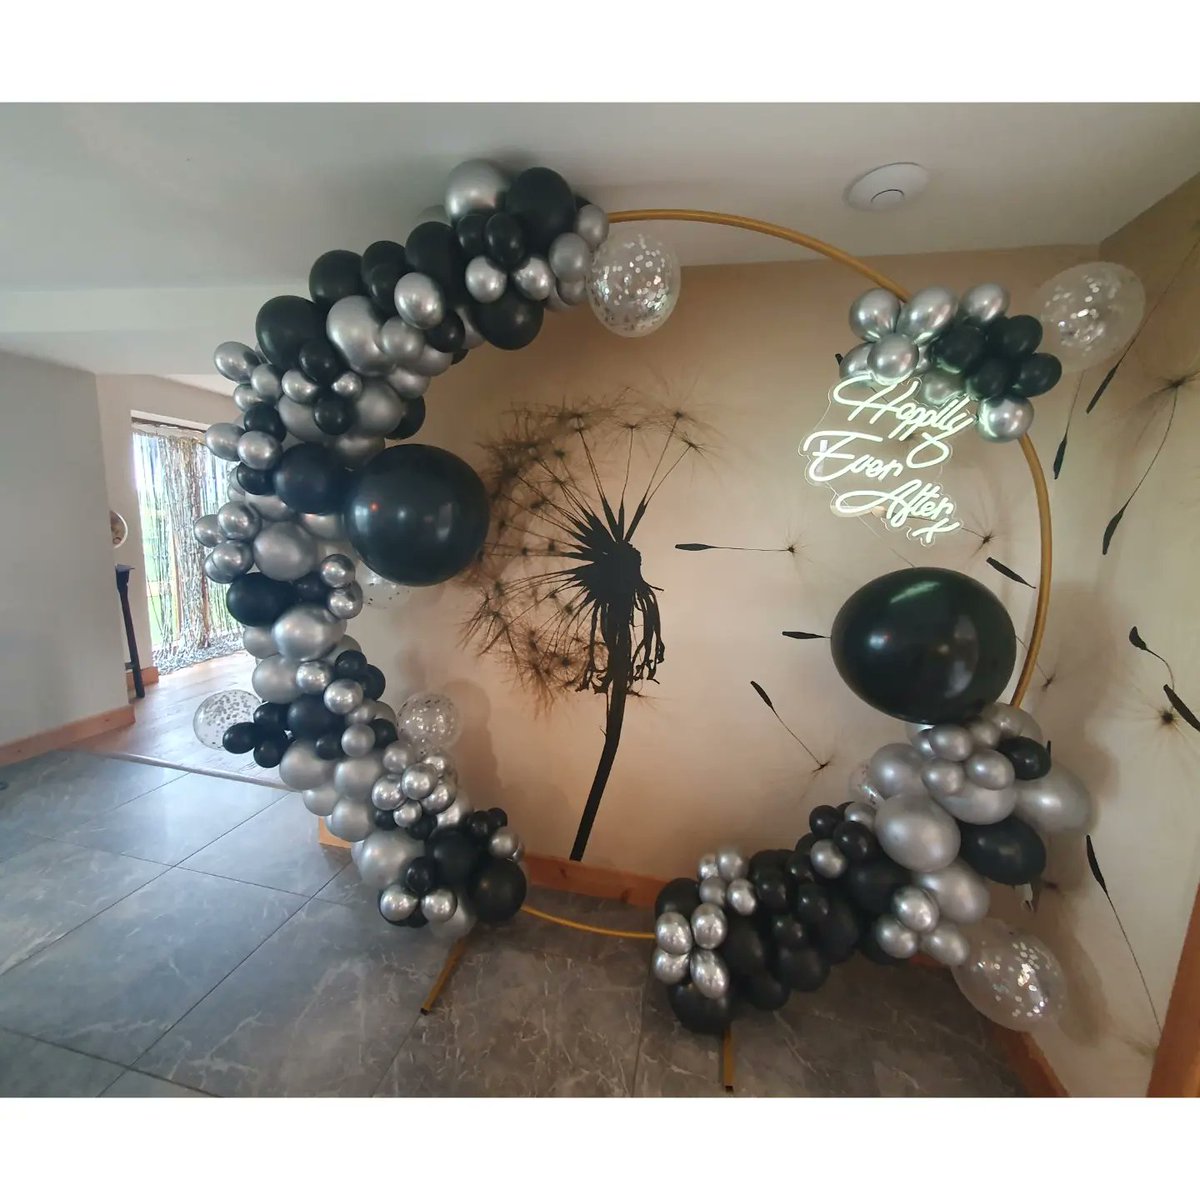 #balloondecor #balloons #balloonart #balloondecoration #ballooncircle #henpartyideas #henpartyplanning #henpartyballoons #henpartyaccessories #partytime #partyhouse #huddersfield #delivery #balloonstylist #happyeverafter #partyplanner #partyplanning #balloonpeople #piazza